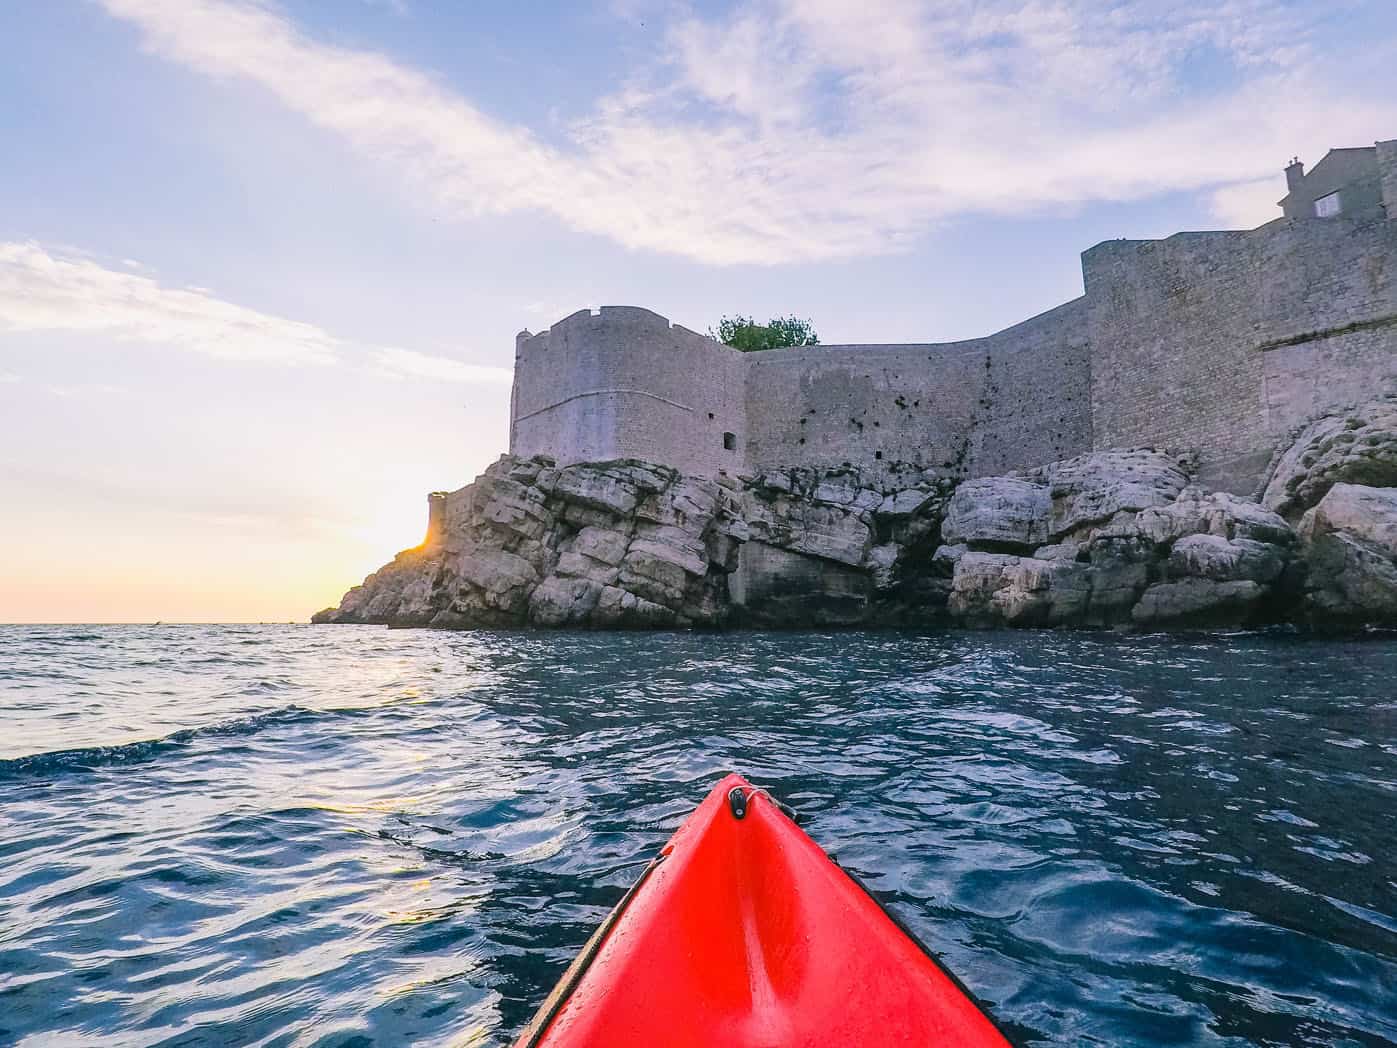 A POV of Dubrovnik's castle walls from a kayak on the ocean in Croatia.